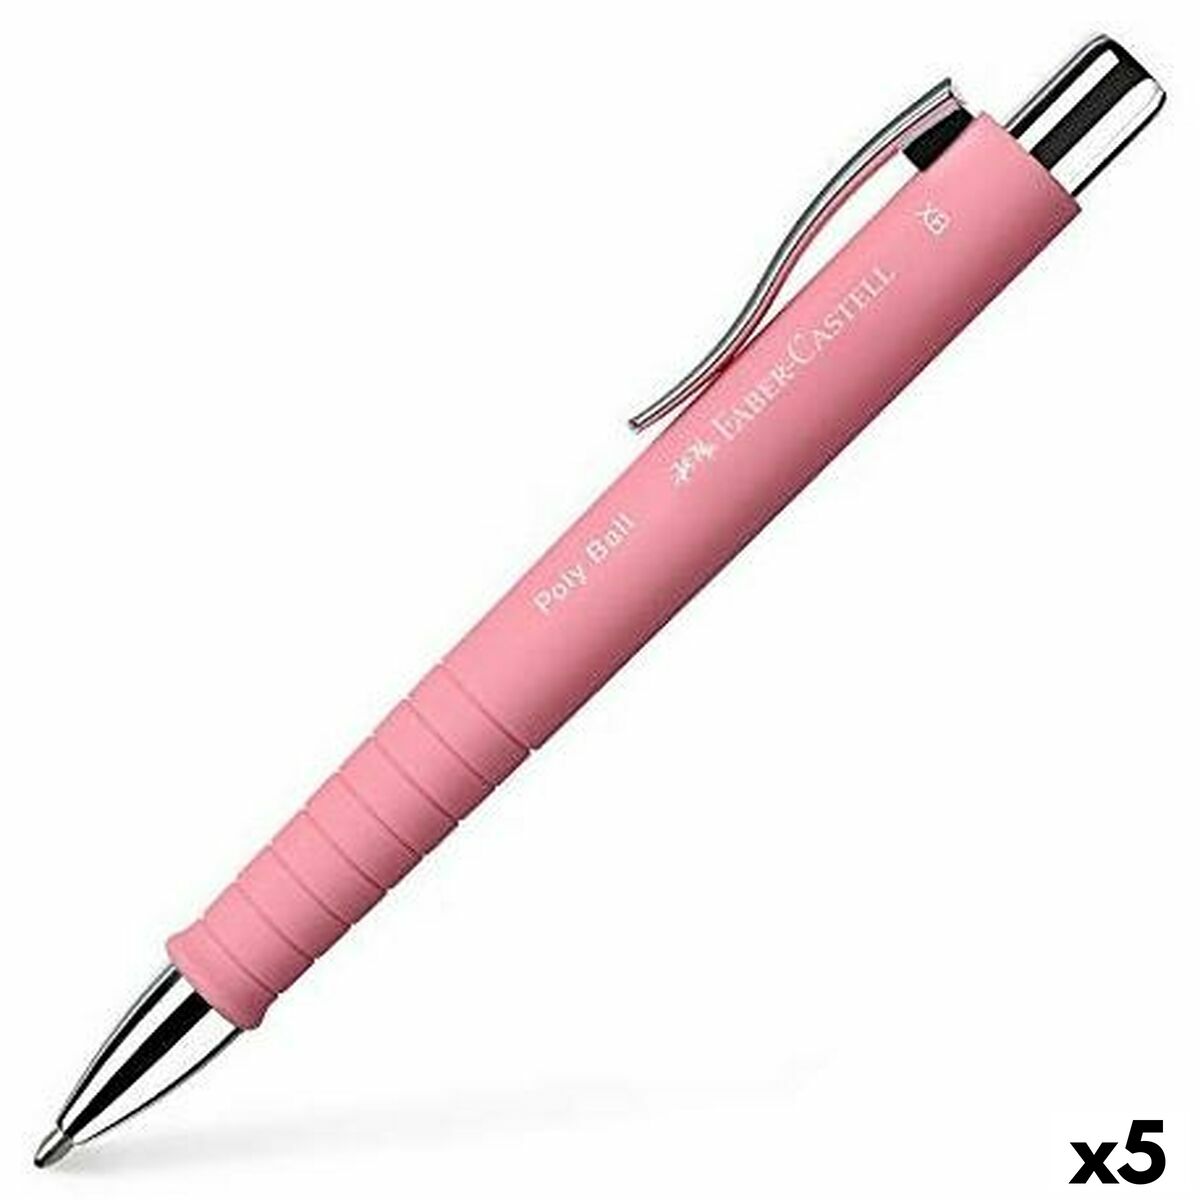 Pen Faber-Castell Poly Ball XB Pink 5 Units